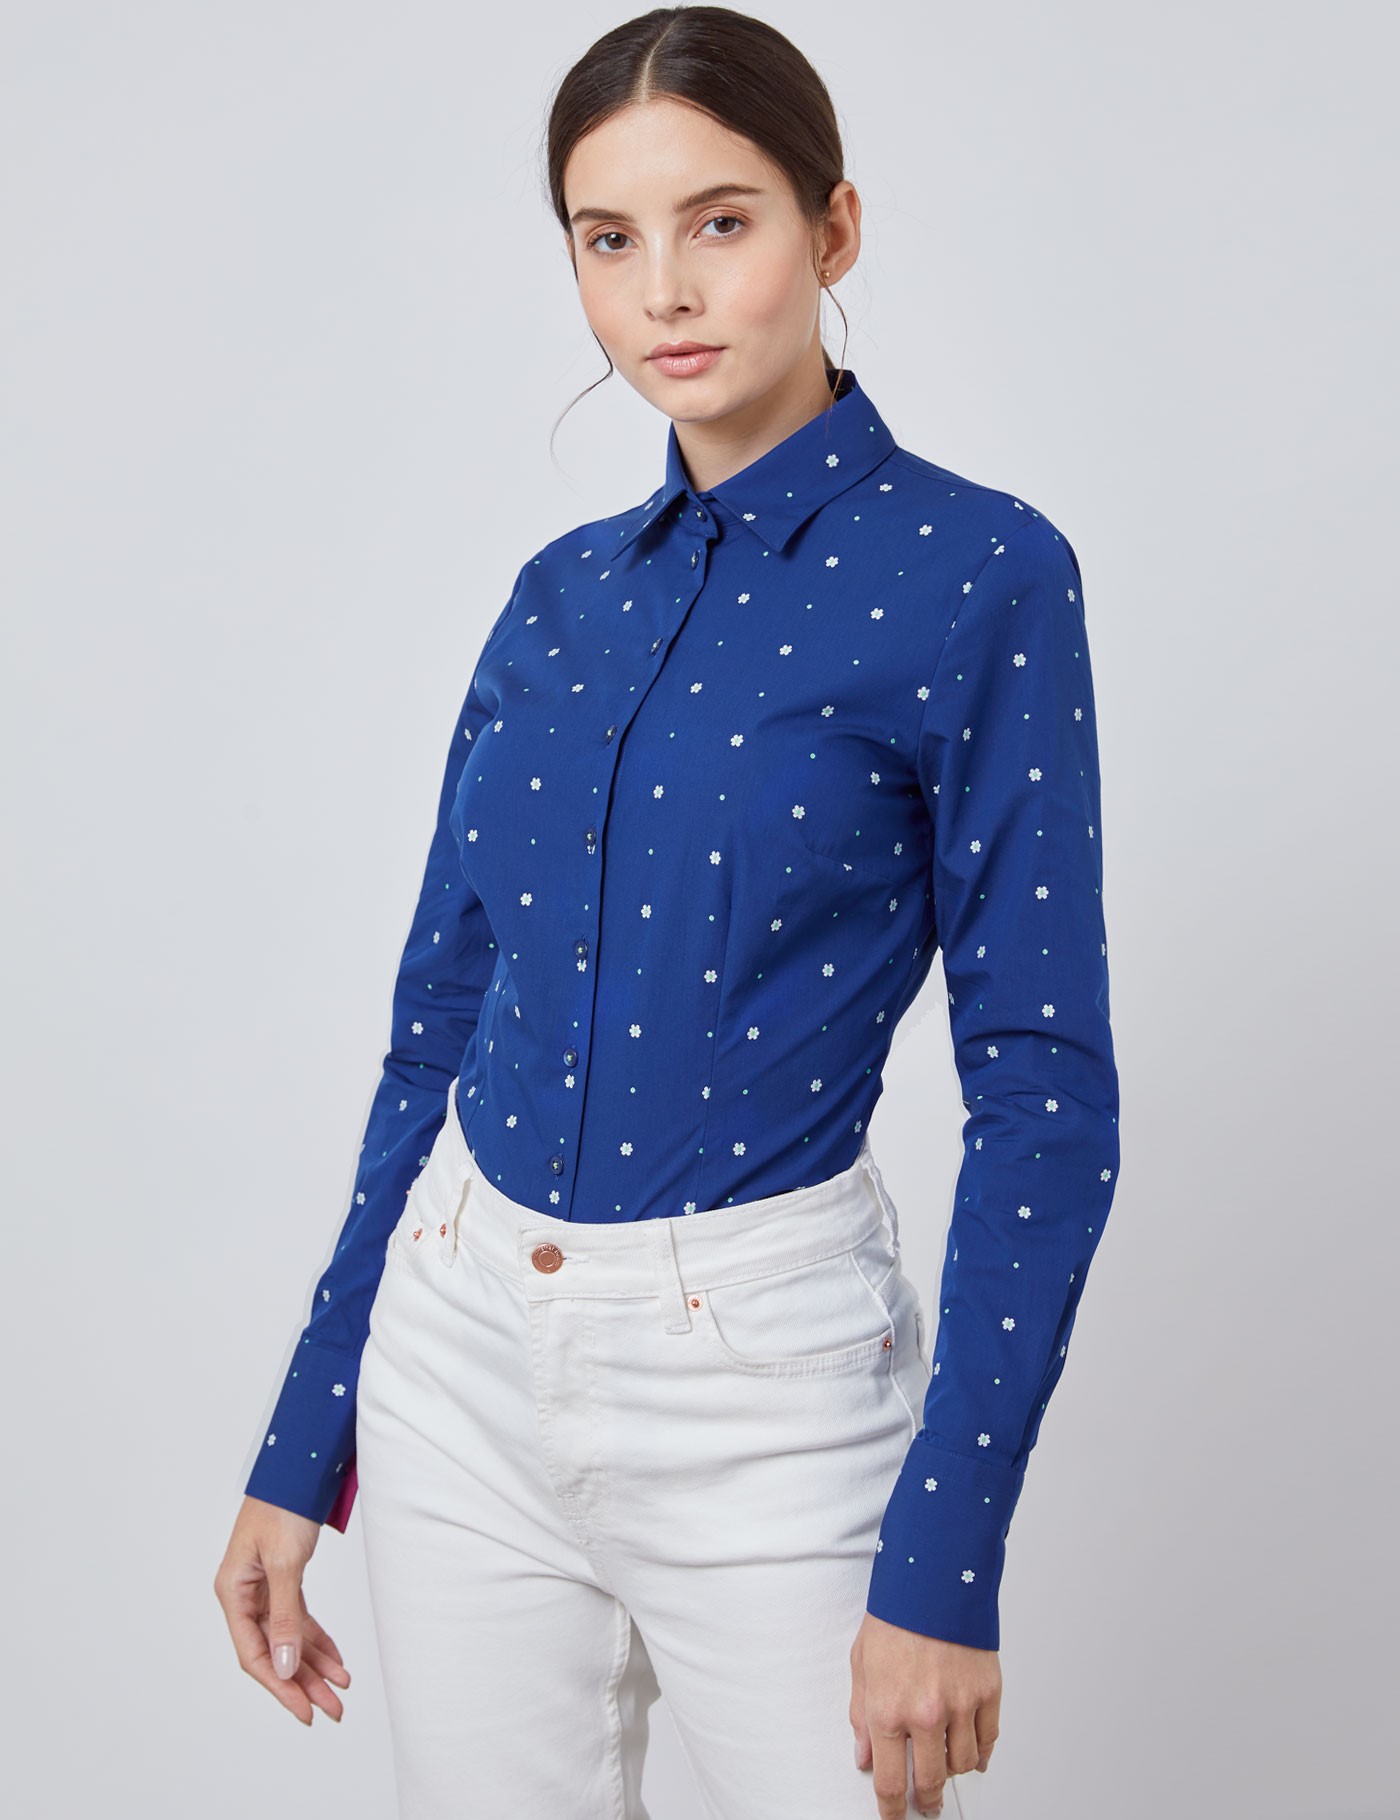 hawes & curtis women's navy & white dobby spot floral fitted shirt - single cuff